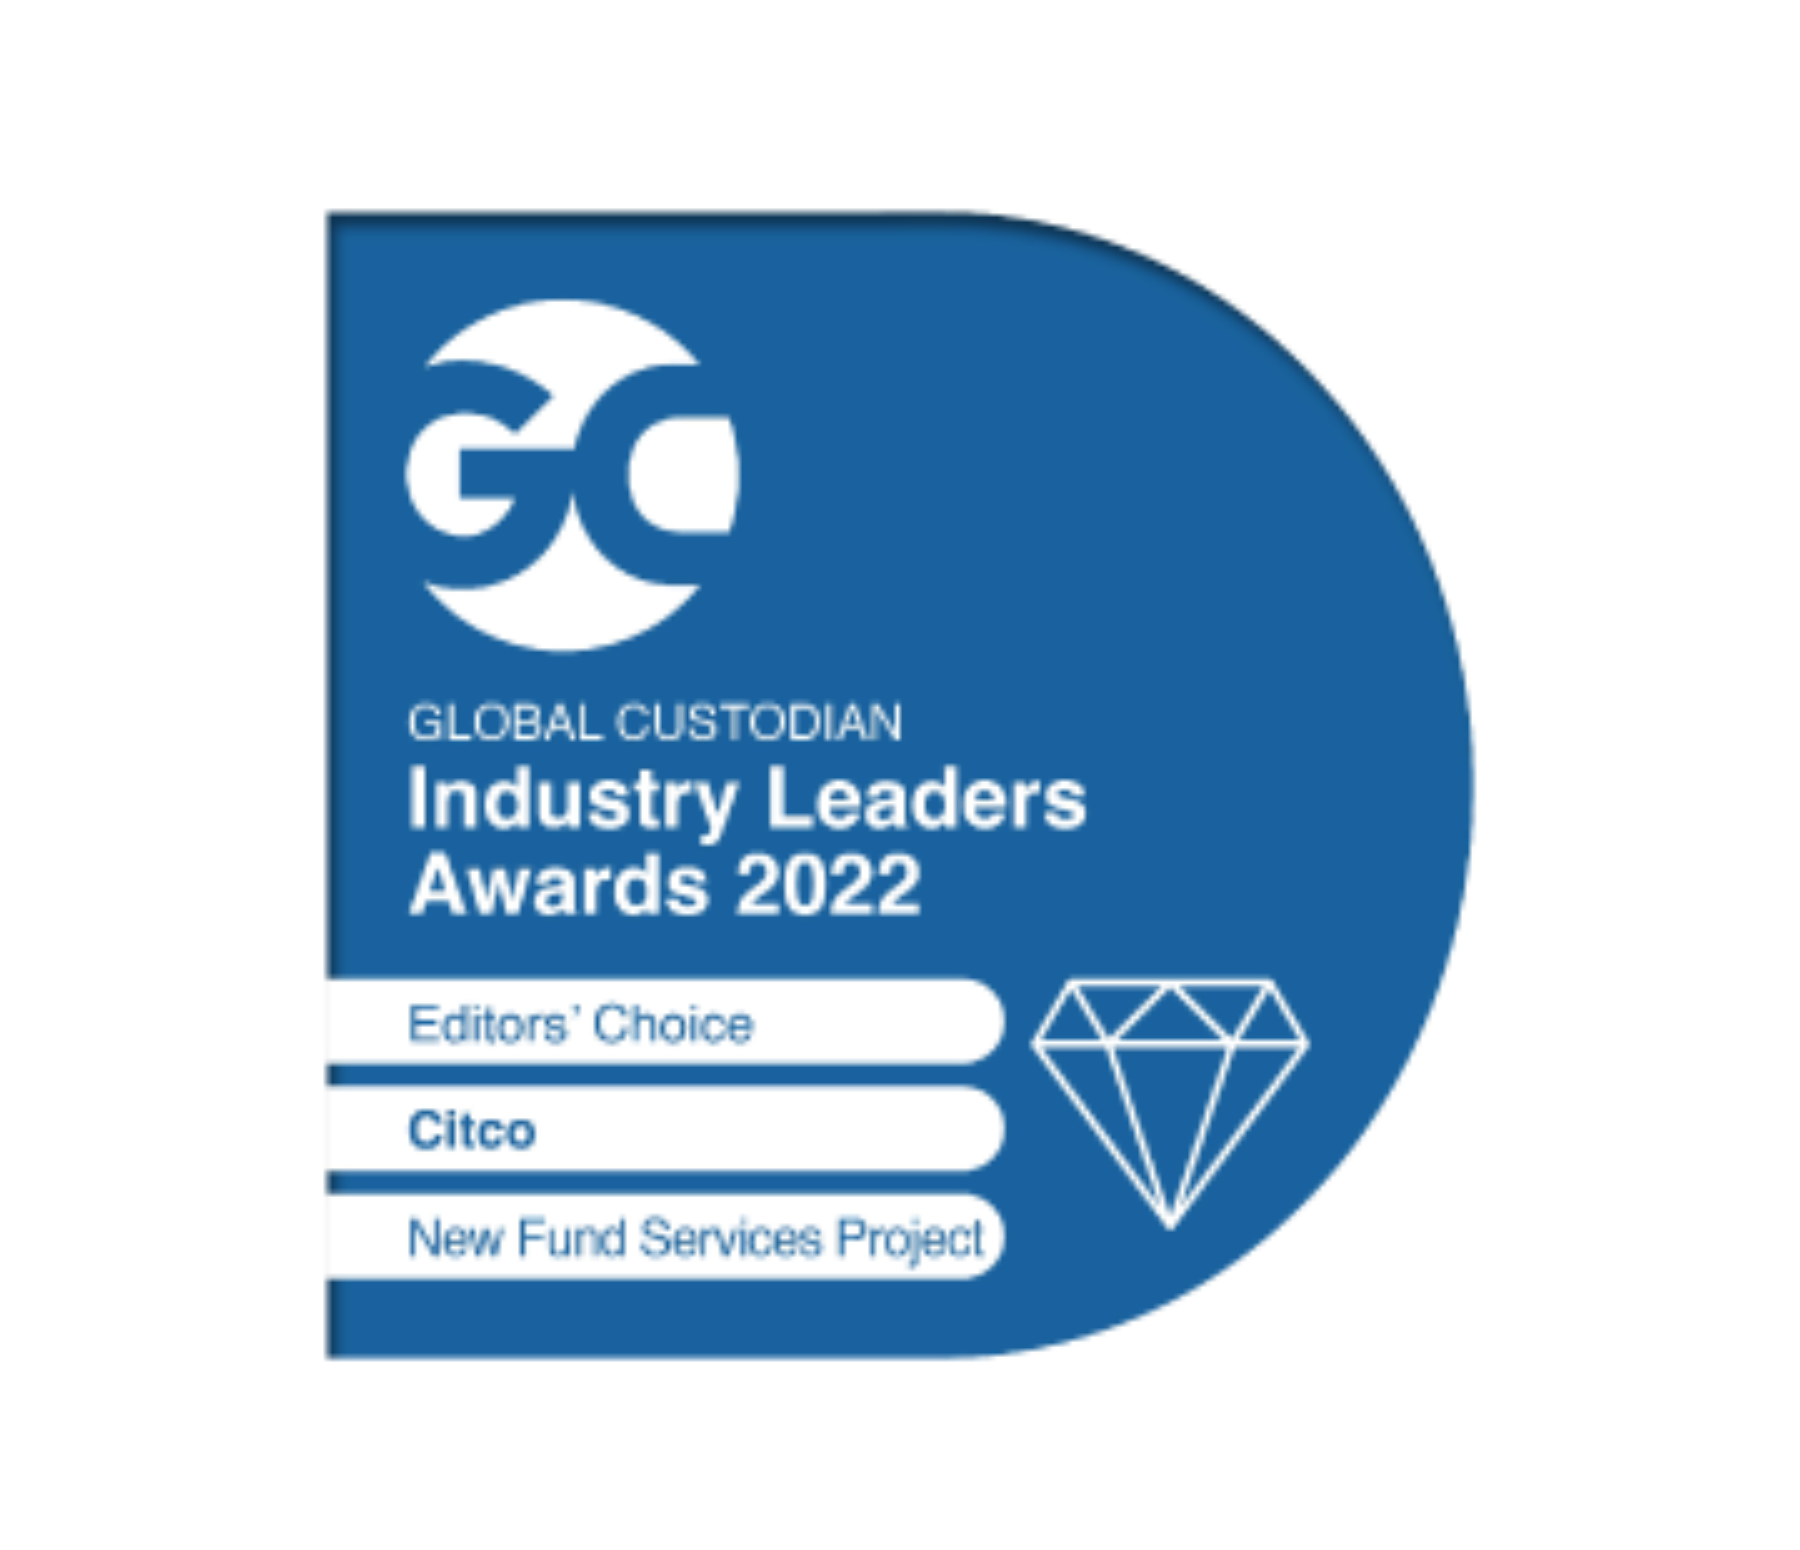 Citco wins two awards at Global Custodian Industry Leaders 2022